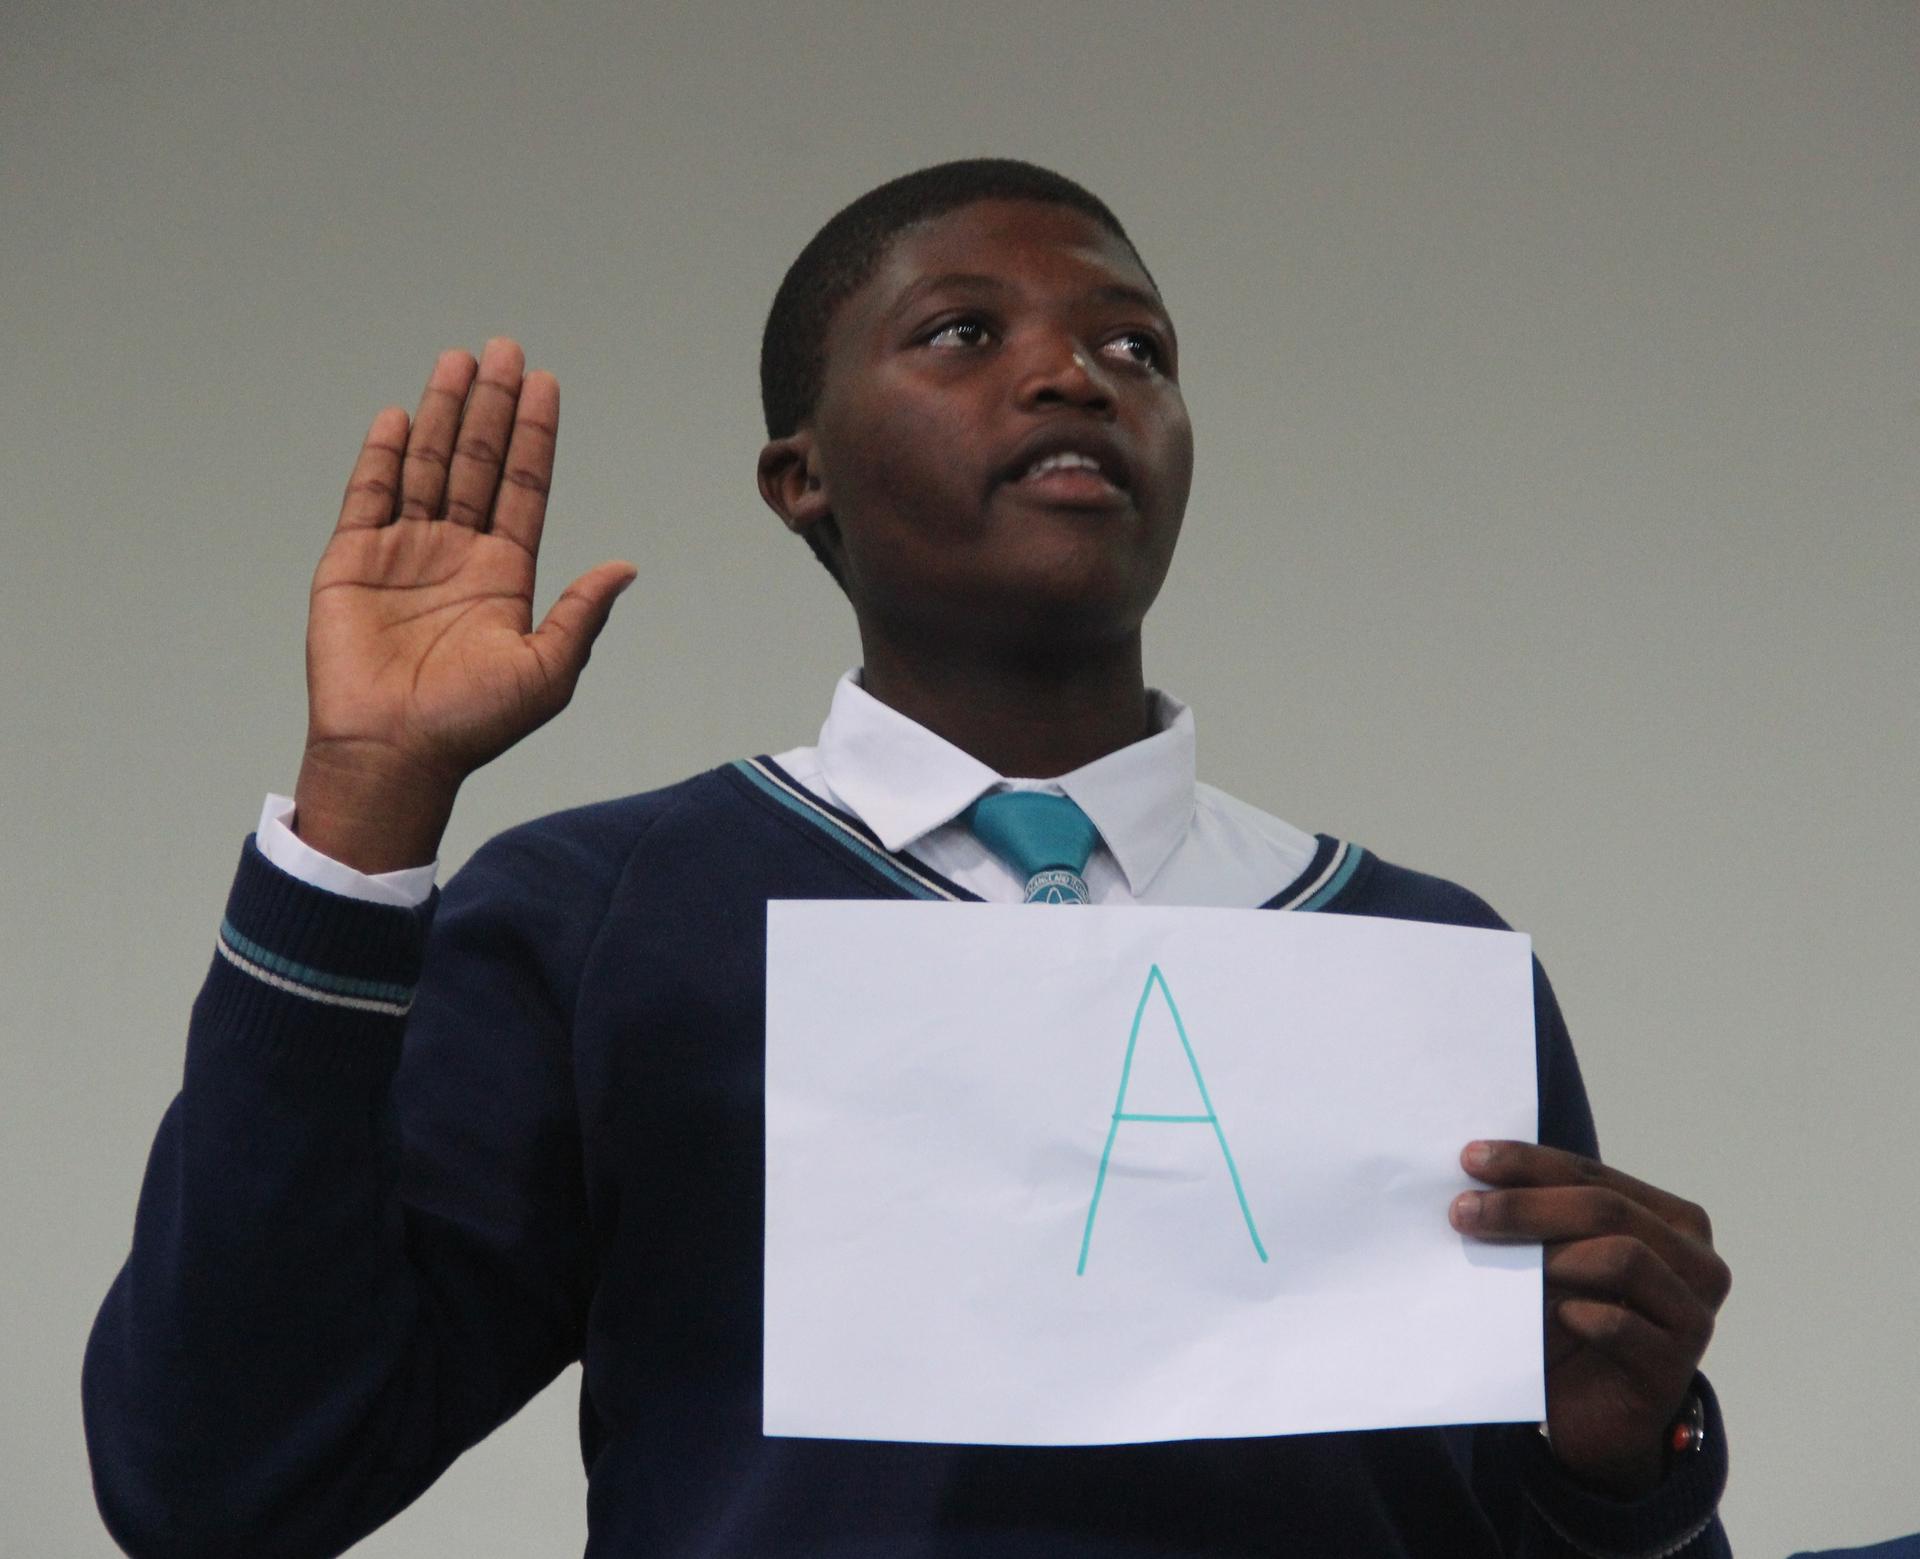 A COSAT student pledges to never tolerate sexual violence.